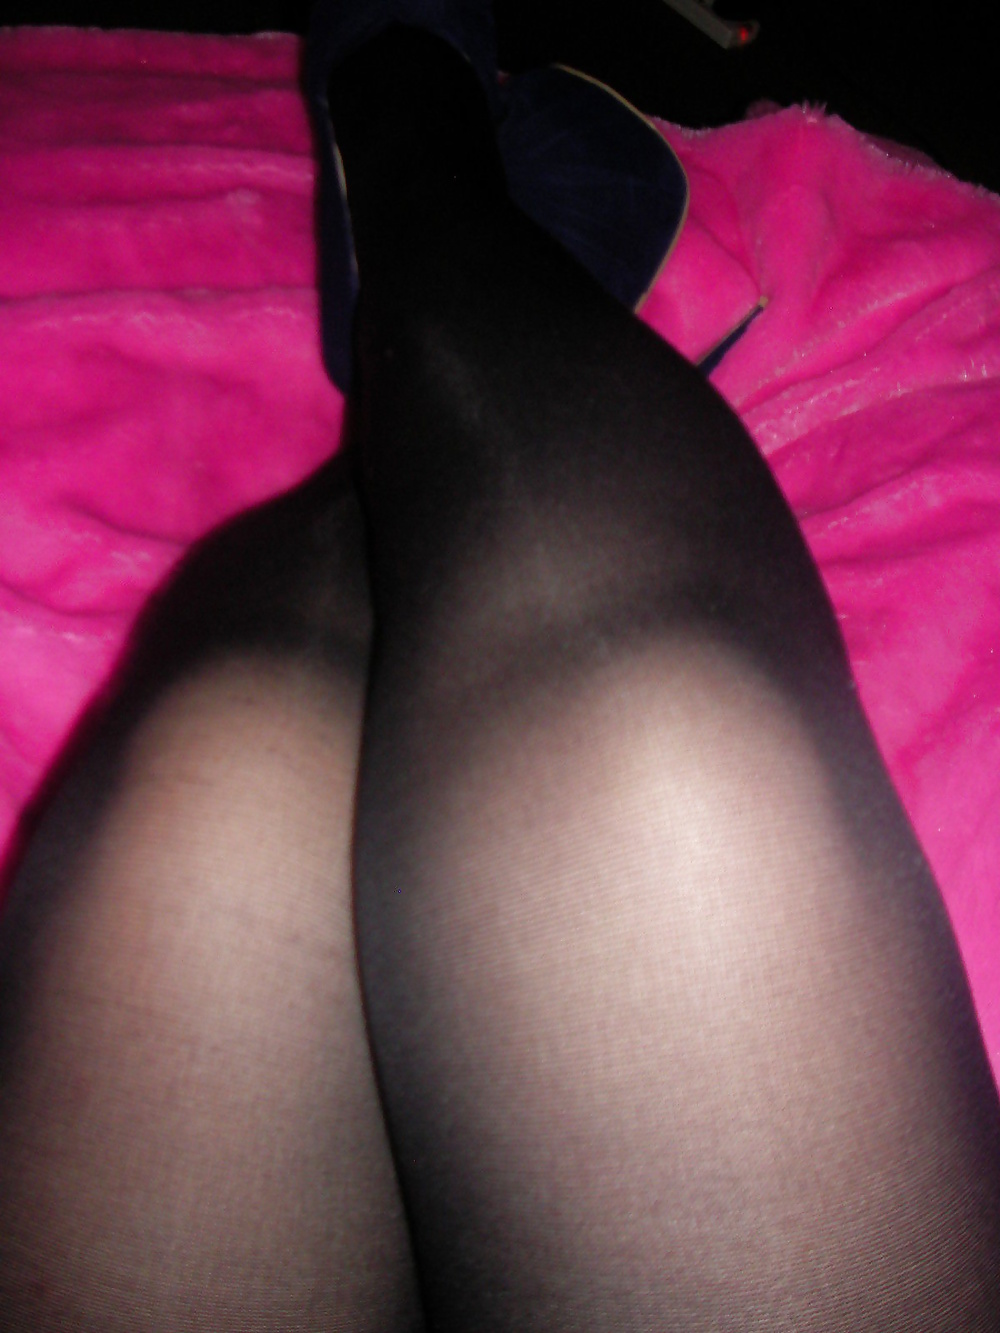 My college tights and my new shoes #39076298